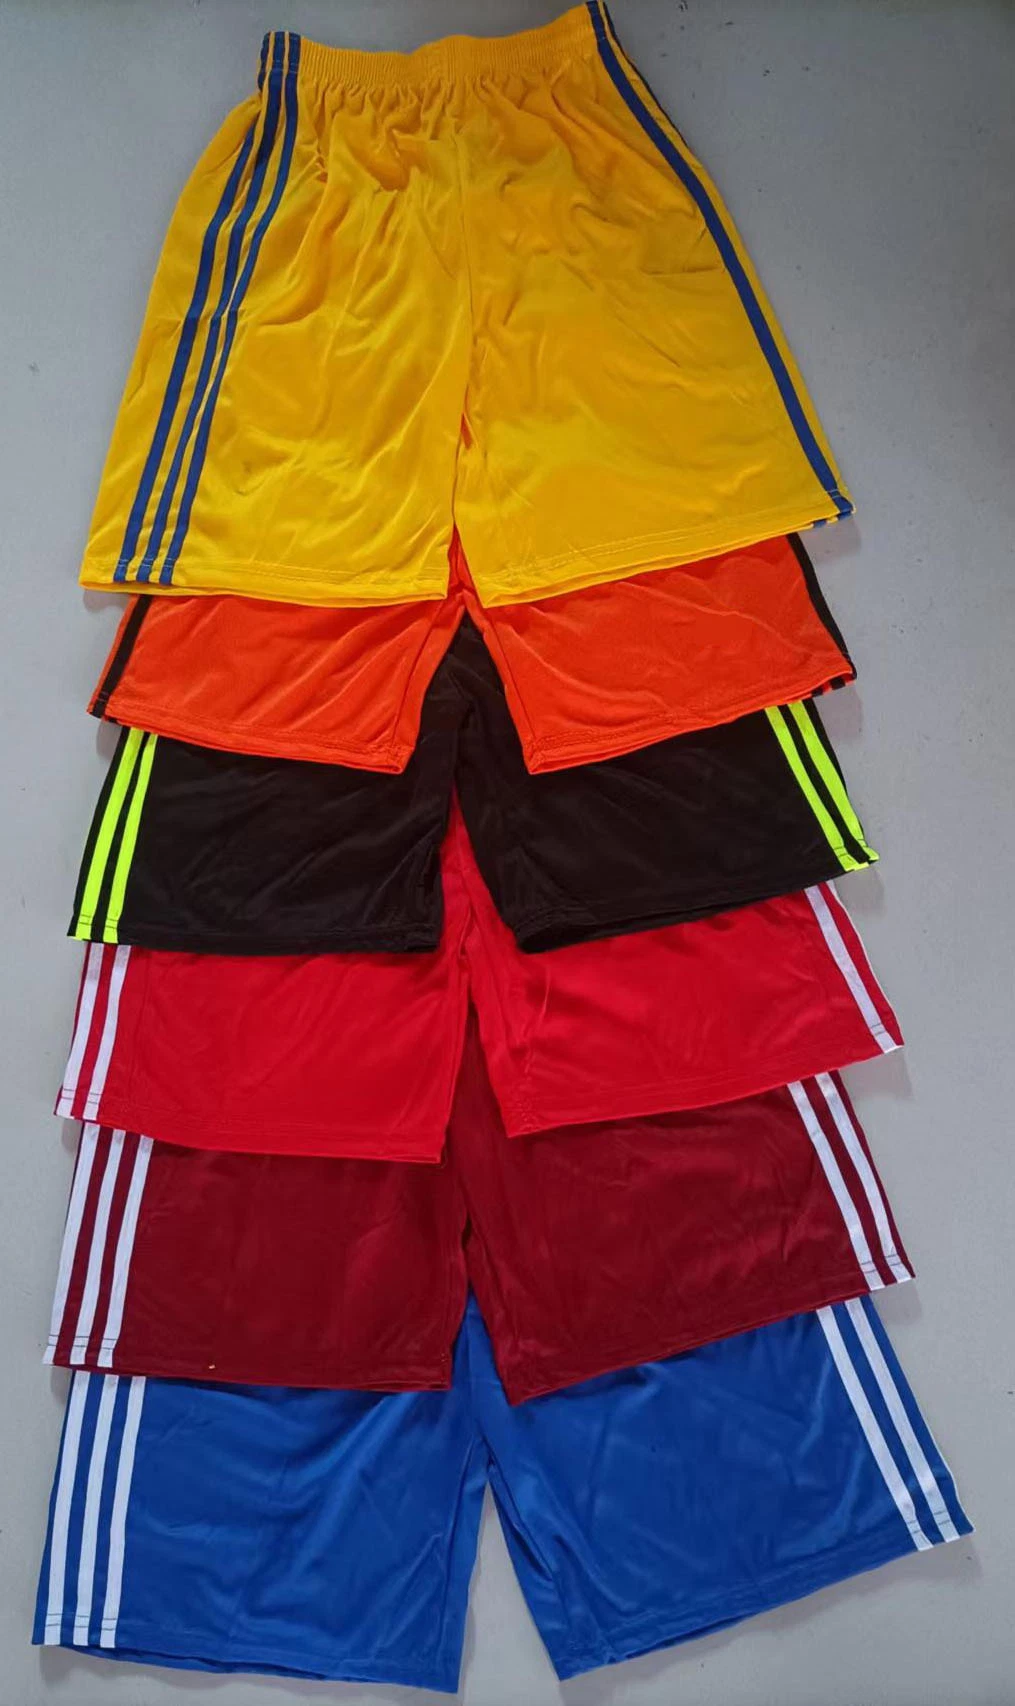 Cheap Dri Fit Quick Dry Basic Football Soccer Sports Shorts for Team Club Basketball Boxing Jersey